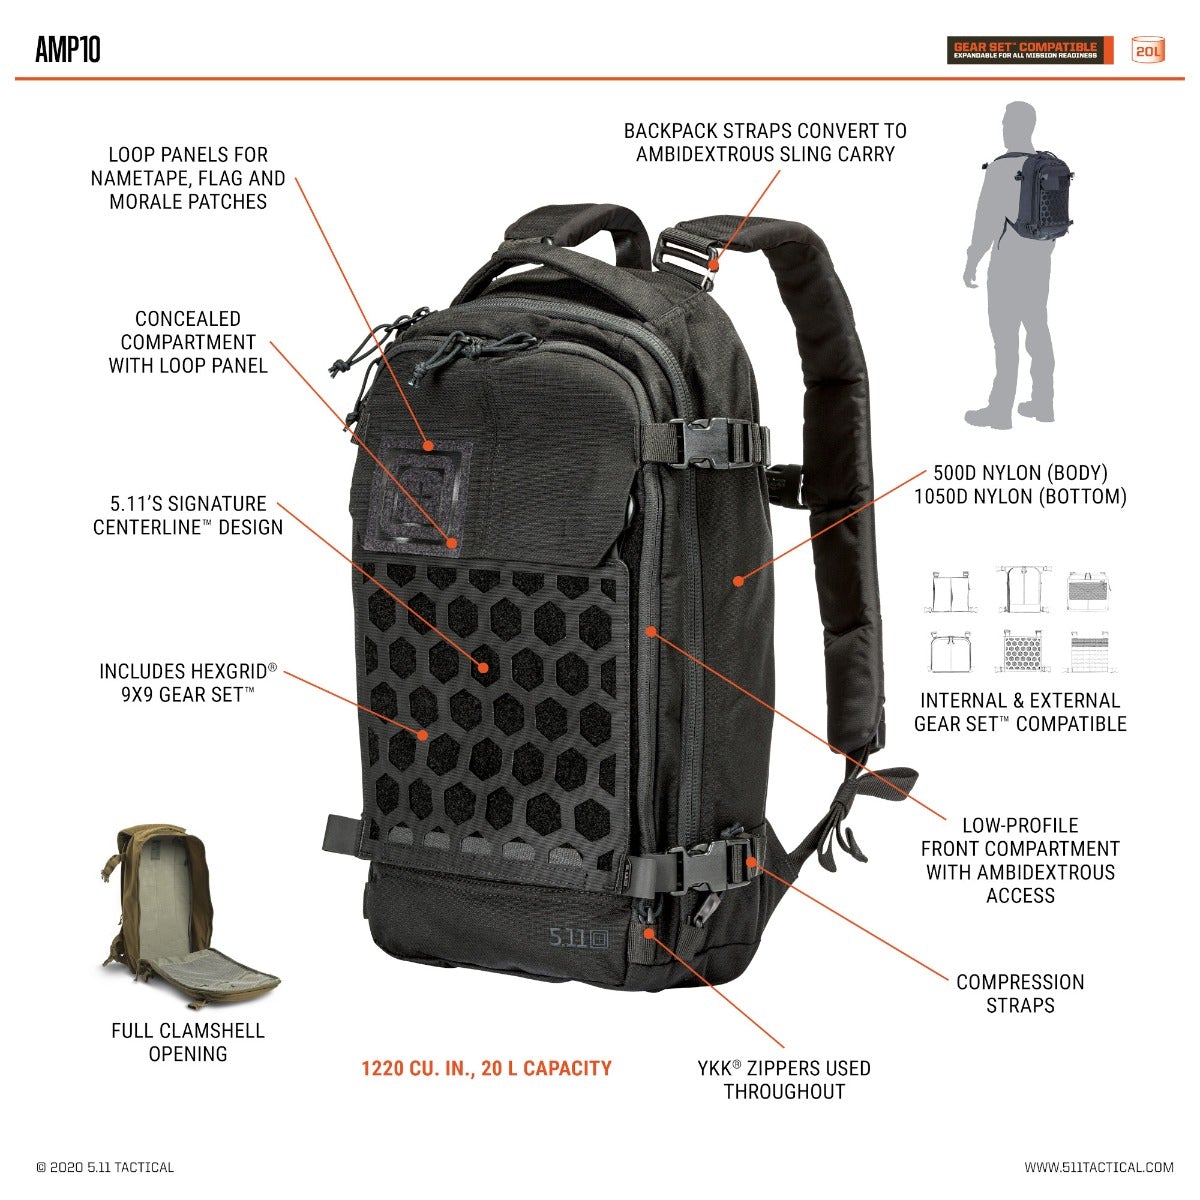 5.11 Tactical AMP10 20L Backpack Tungsten Bags, Packs and Cases 5.11 Tactical Tactical Gear Supplier Tactical Distributors Australia